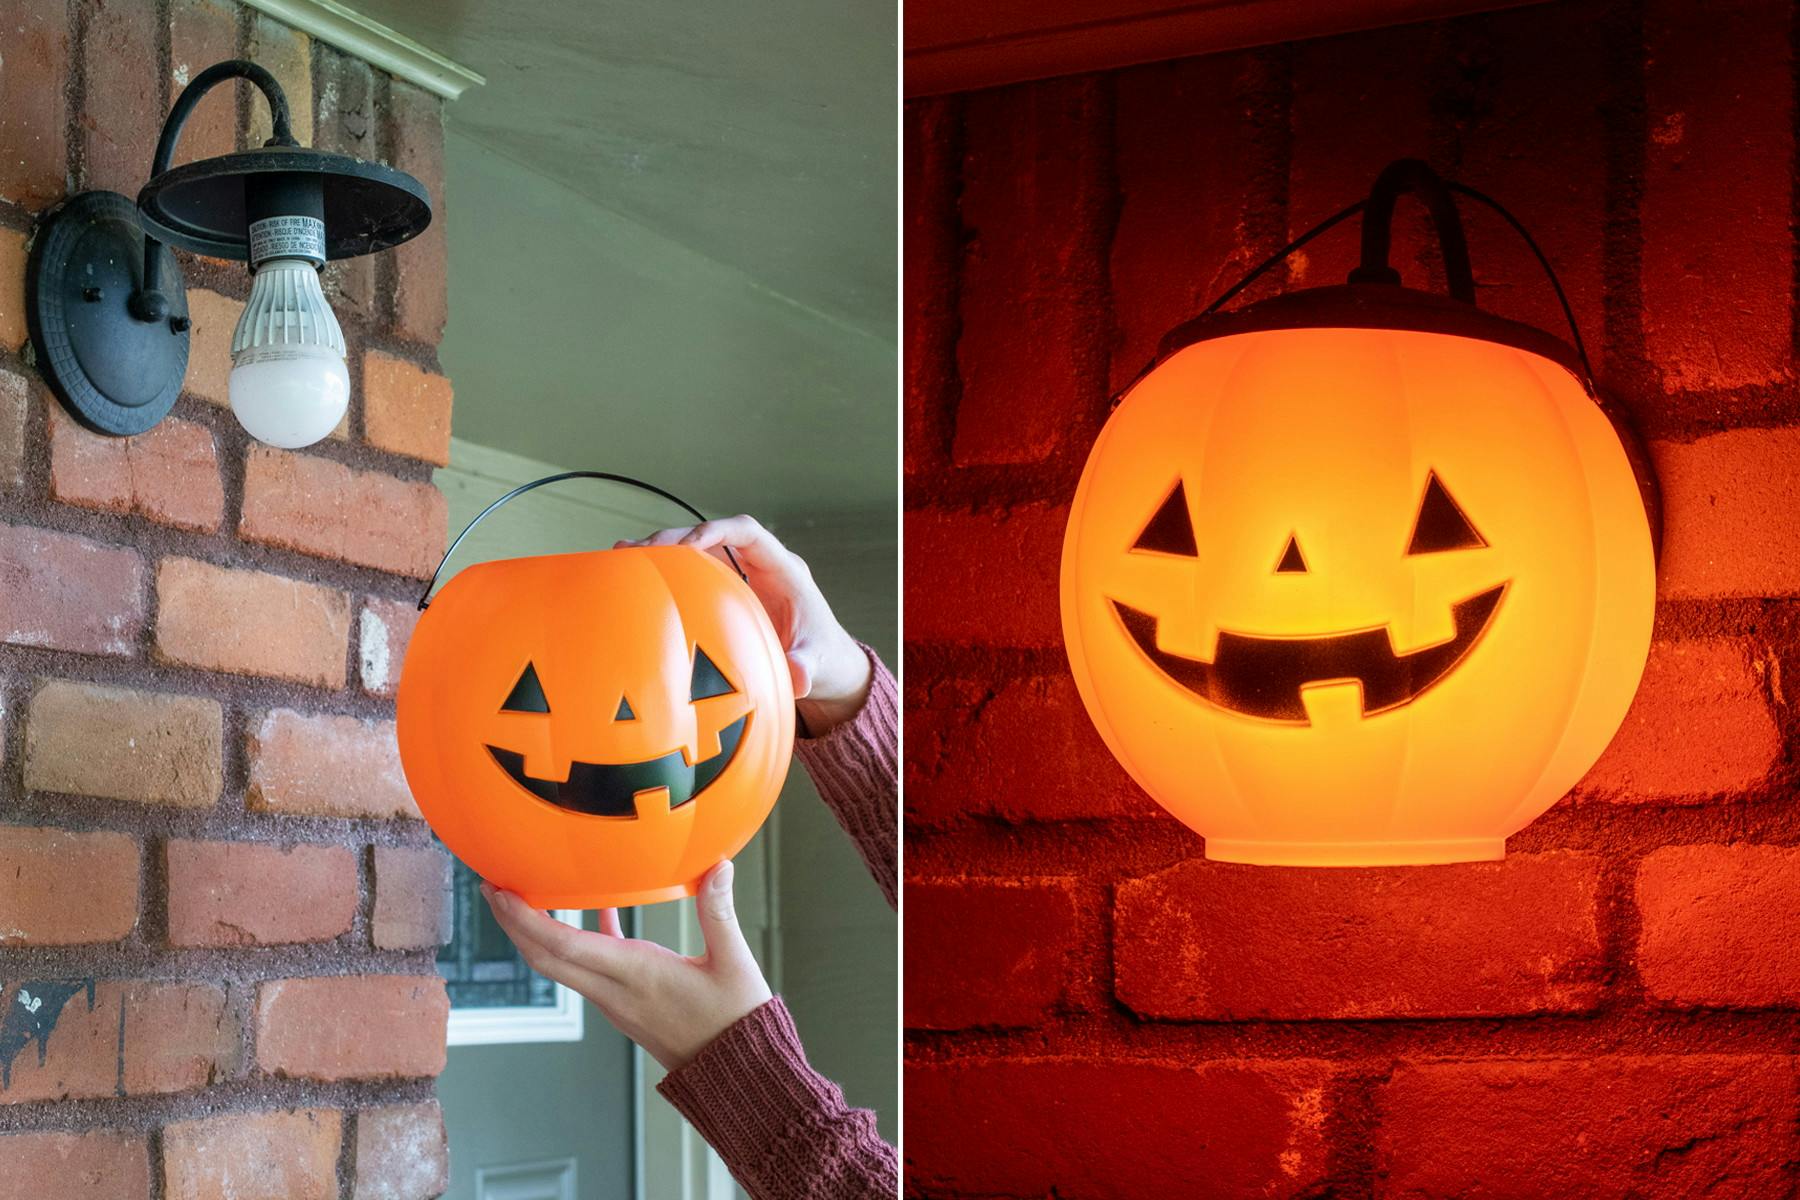 A person covering an outdoor light with a trick-or-treat pumpkin pail, and the pumpkin pail glowing at night.